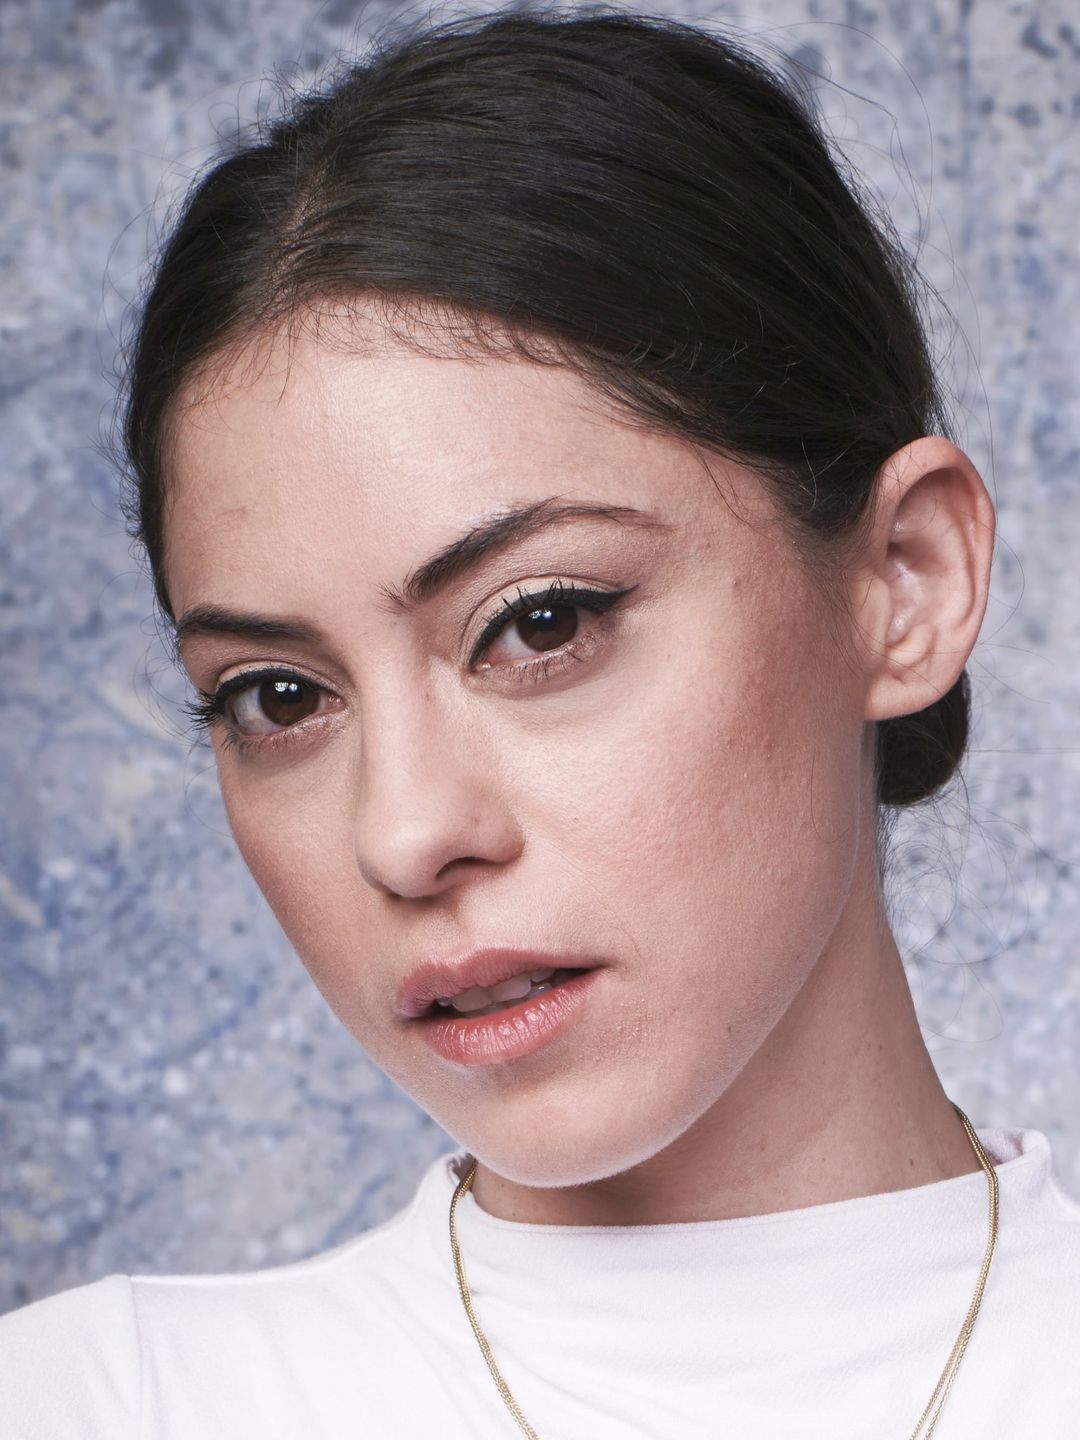 Rosa Salazar who is she